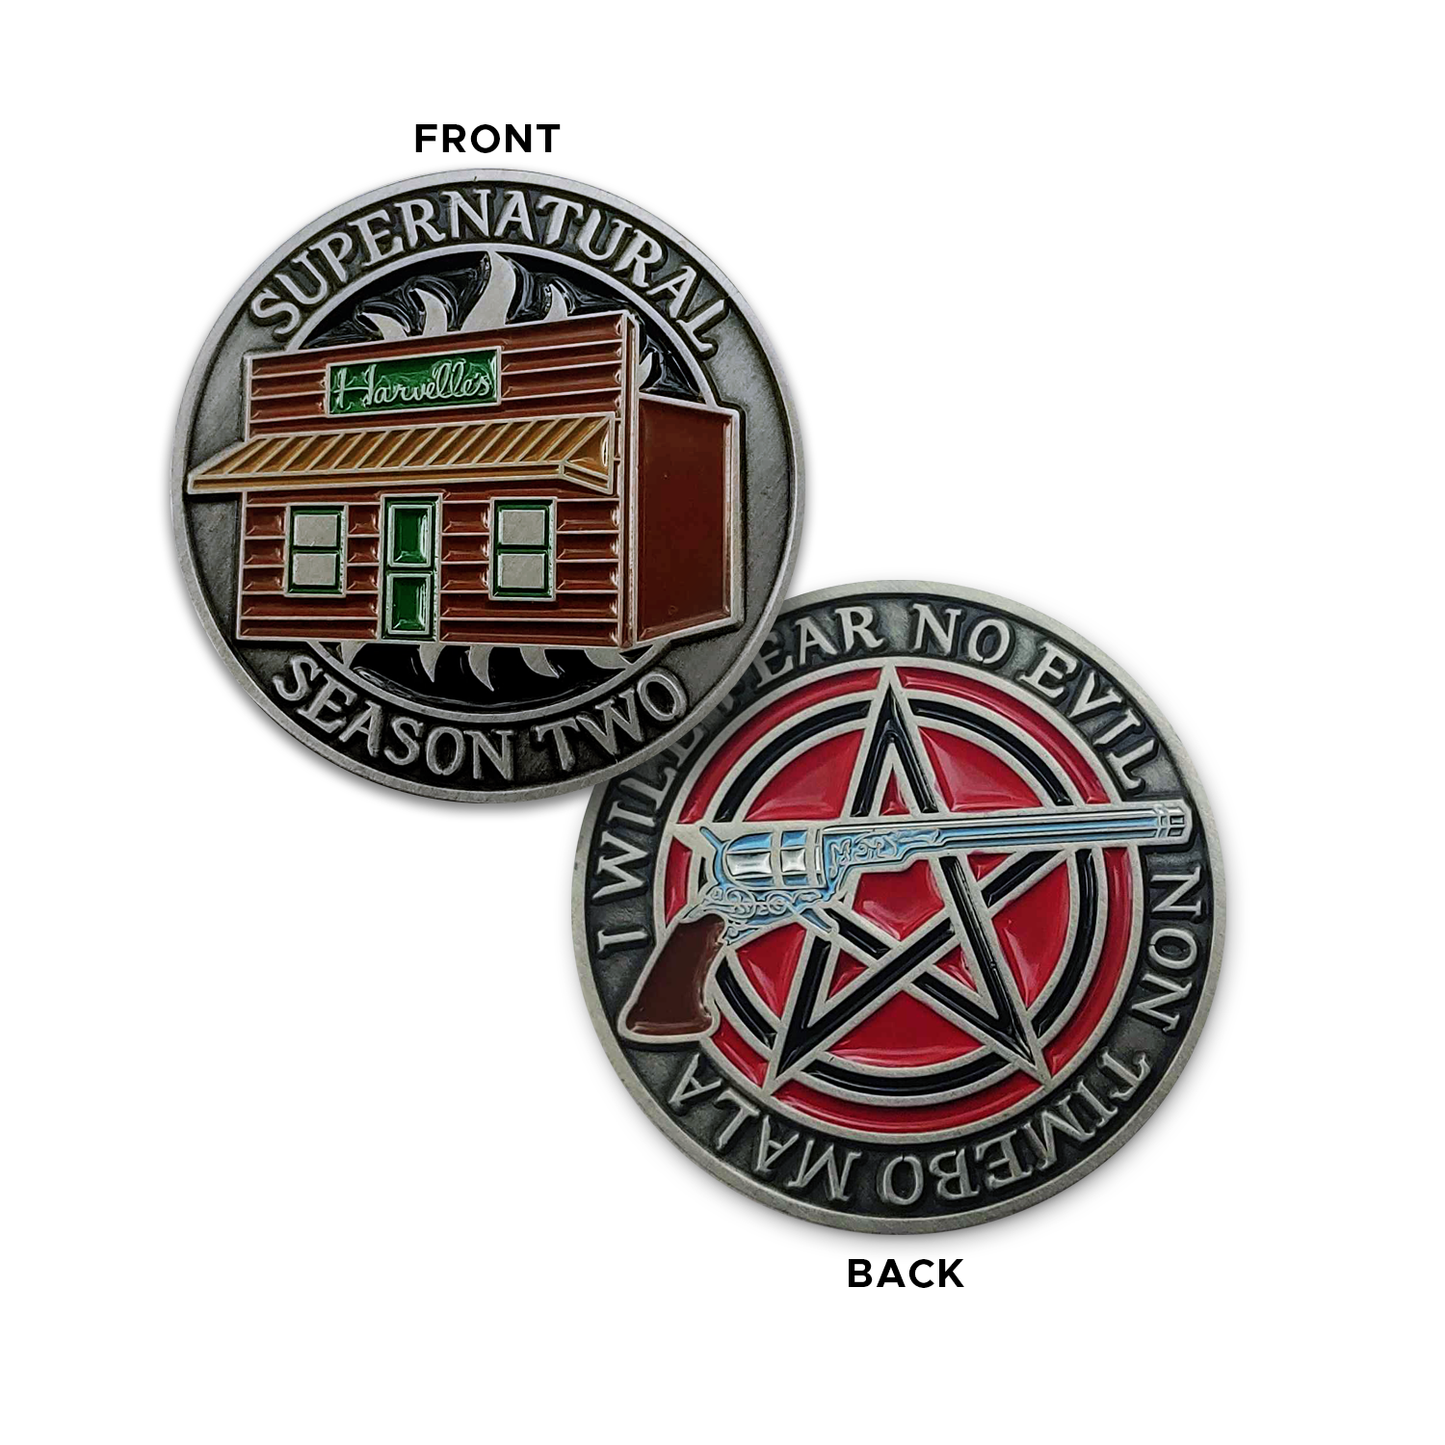 A brass coin with "Supernatural season two" over an anti-possession symbol with a storefront that reads "Harwelle's" on it on one side and "I will fear no evil - Non timebo mala" with the Colt pistol over a pentagram on the other.